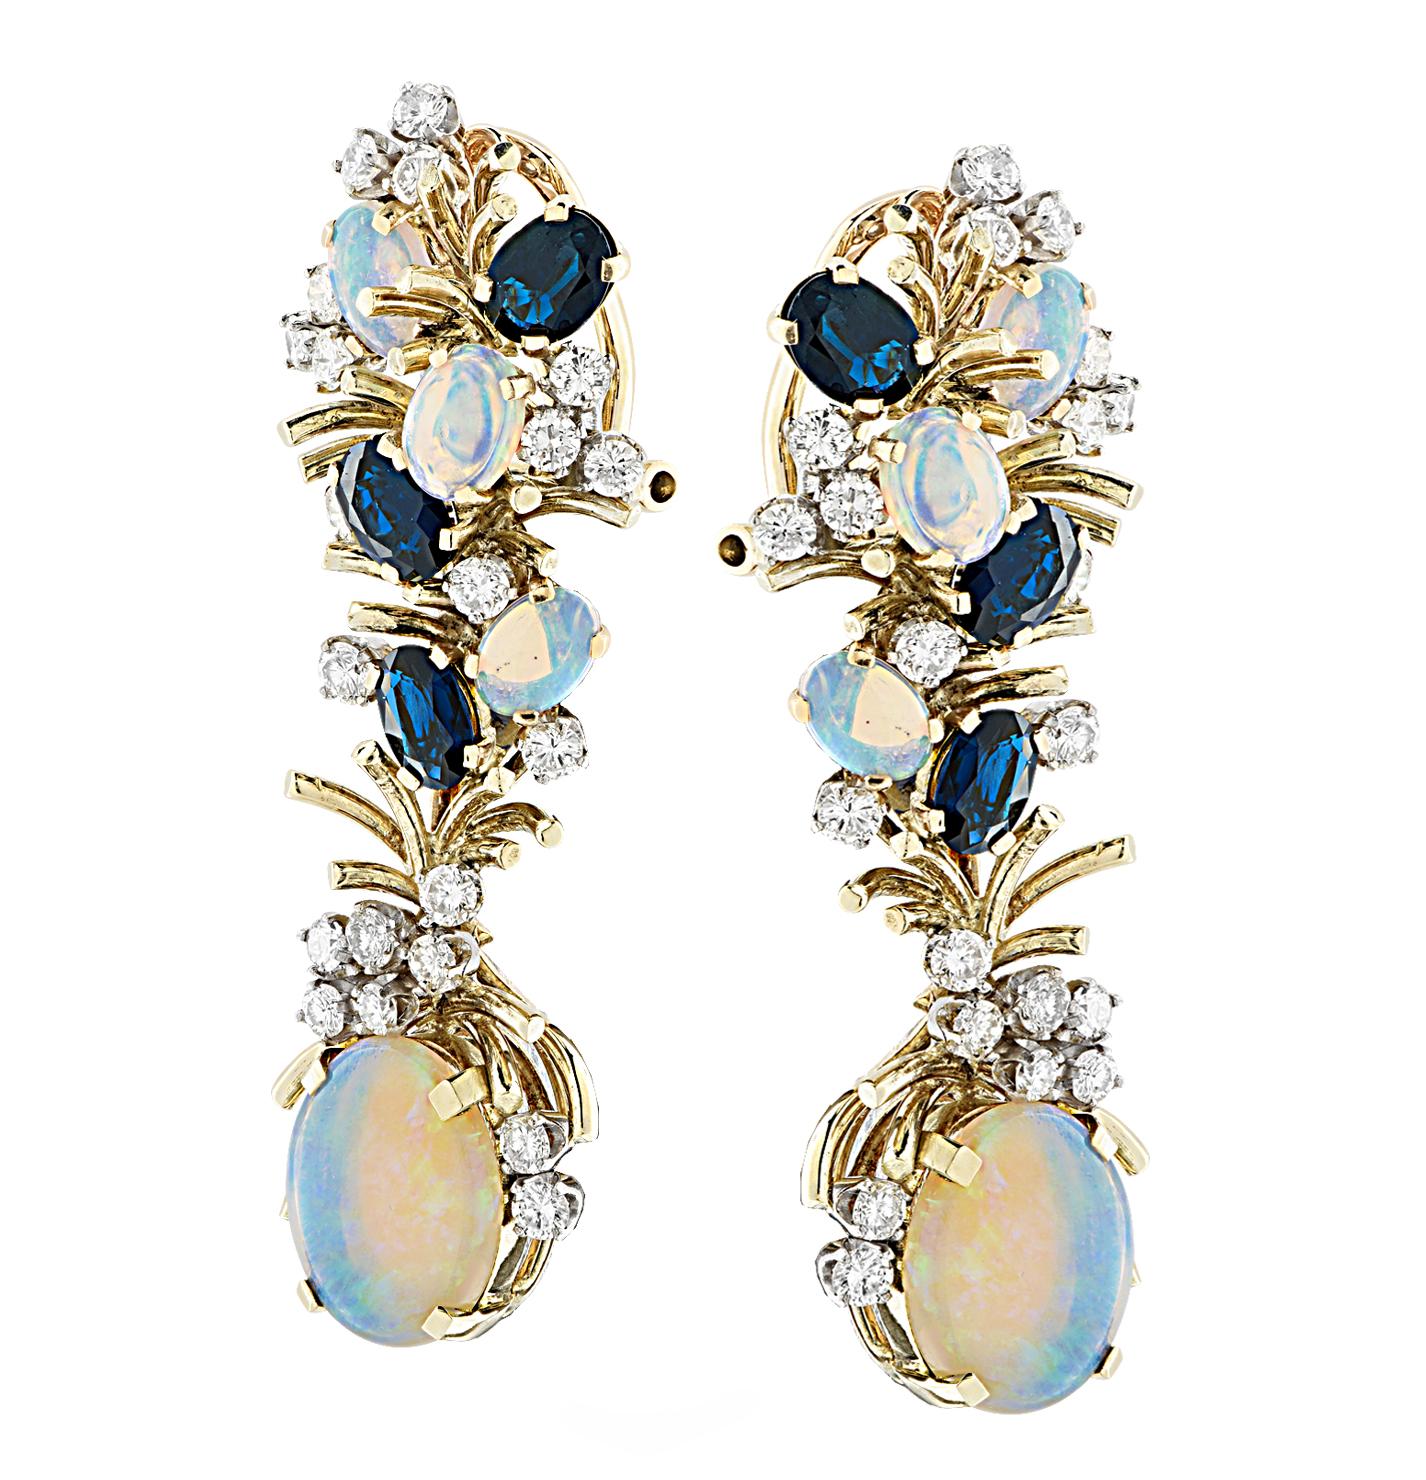 Spectacular dangle earrings crafted in yellow gold, showcasing 8 oval opals weighing approximately 3.5 carats total, 6 oval cut sapphires weighing approximately 1.5 carats total and 42 round brilliant cut diamonds weighing 2 carats total, G-H color,